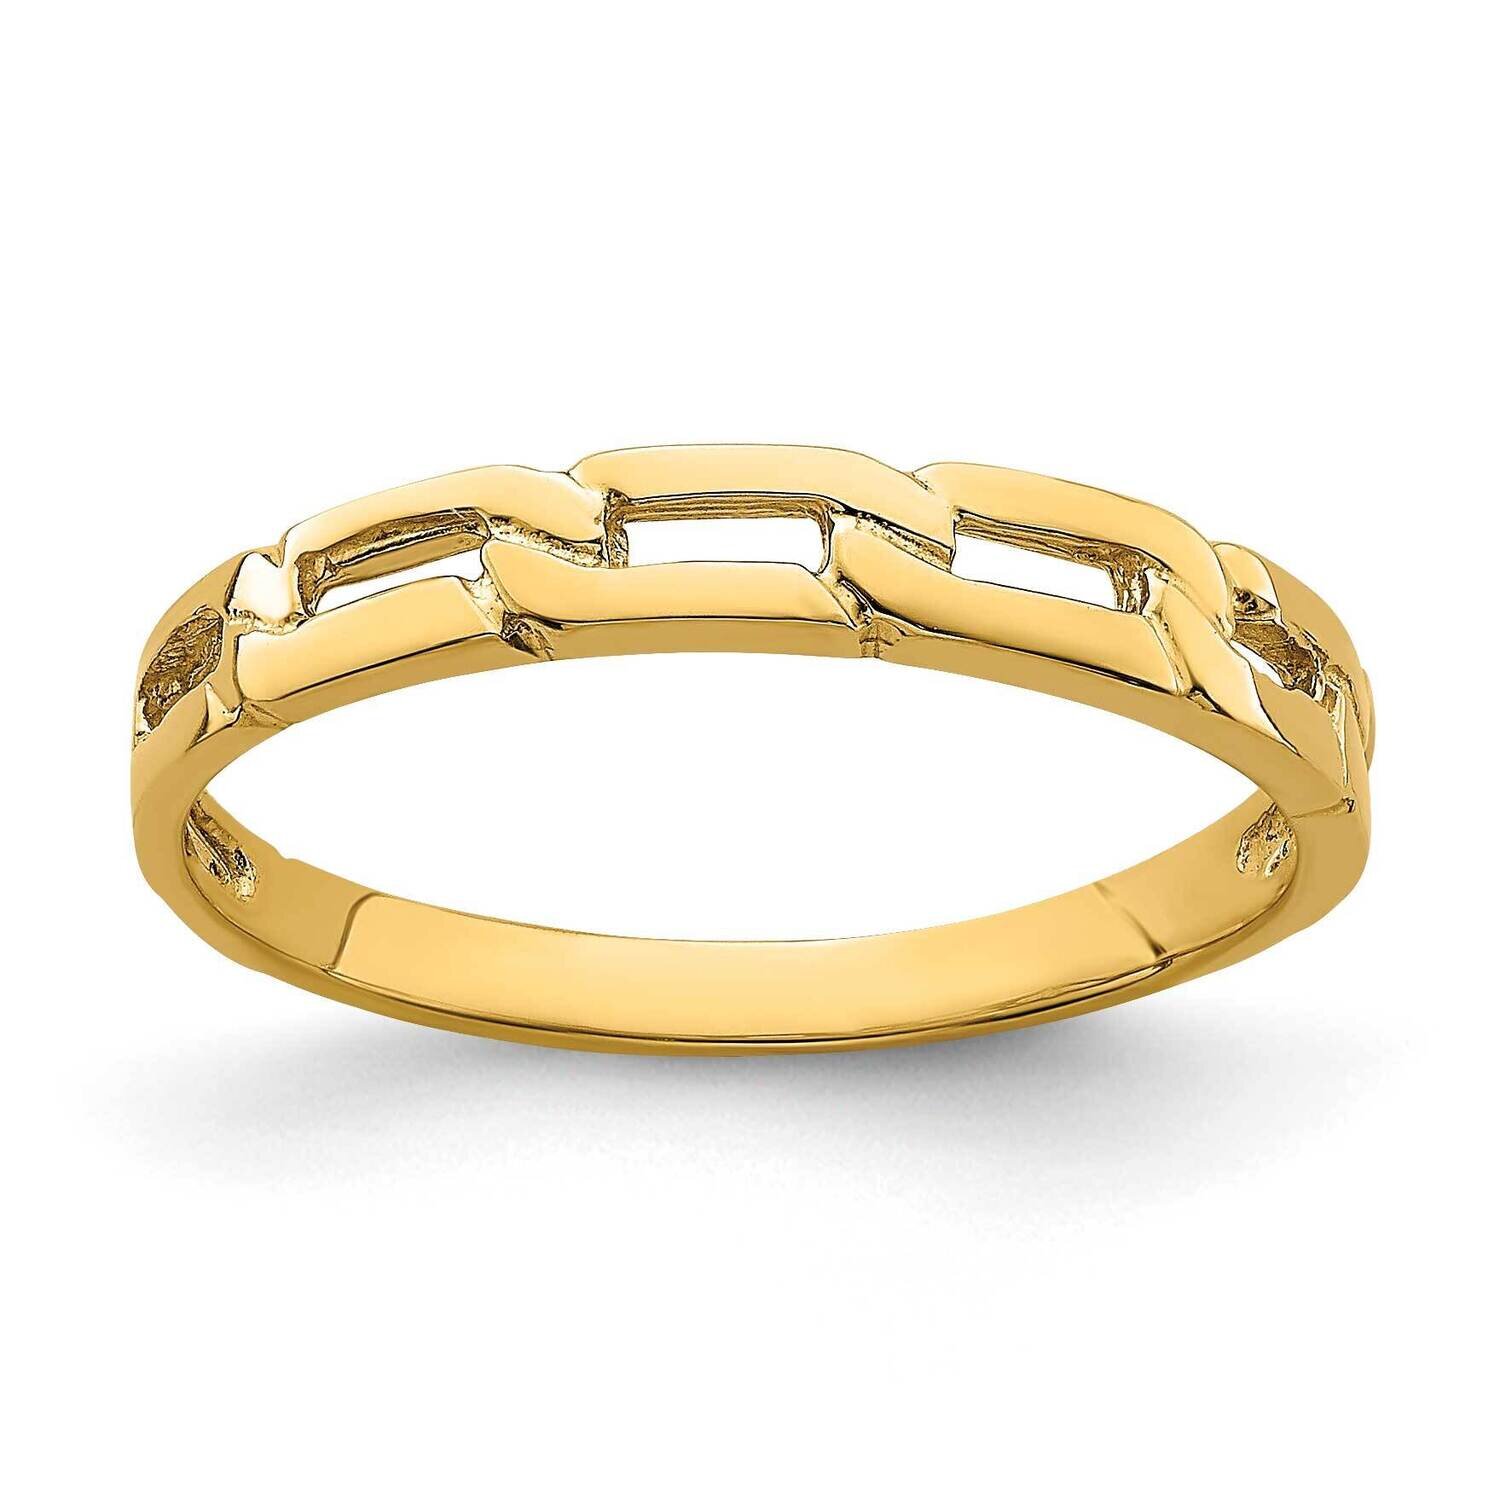 Five Chain Link Band Ring 14k Gold K4591